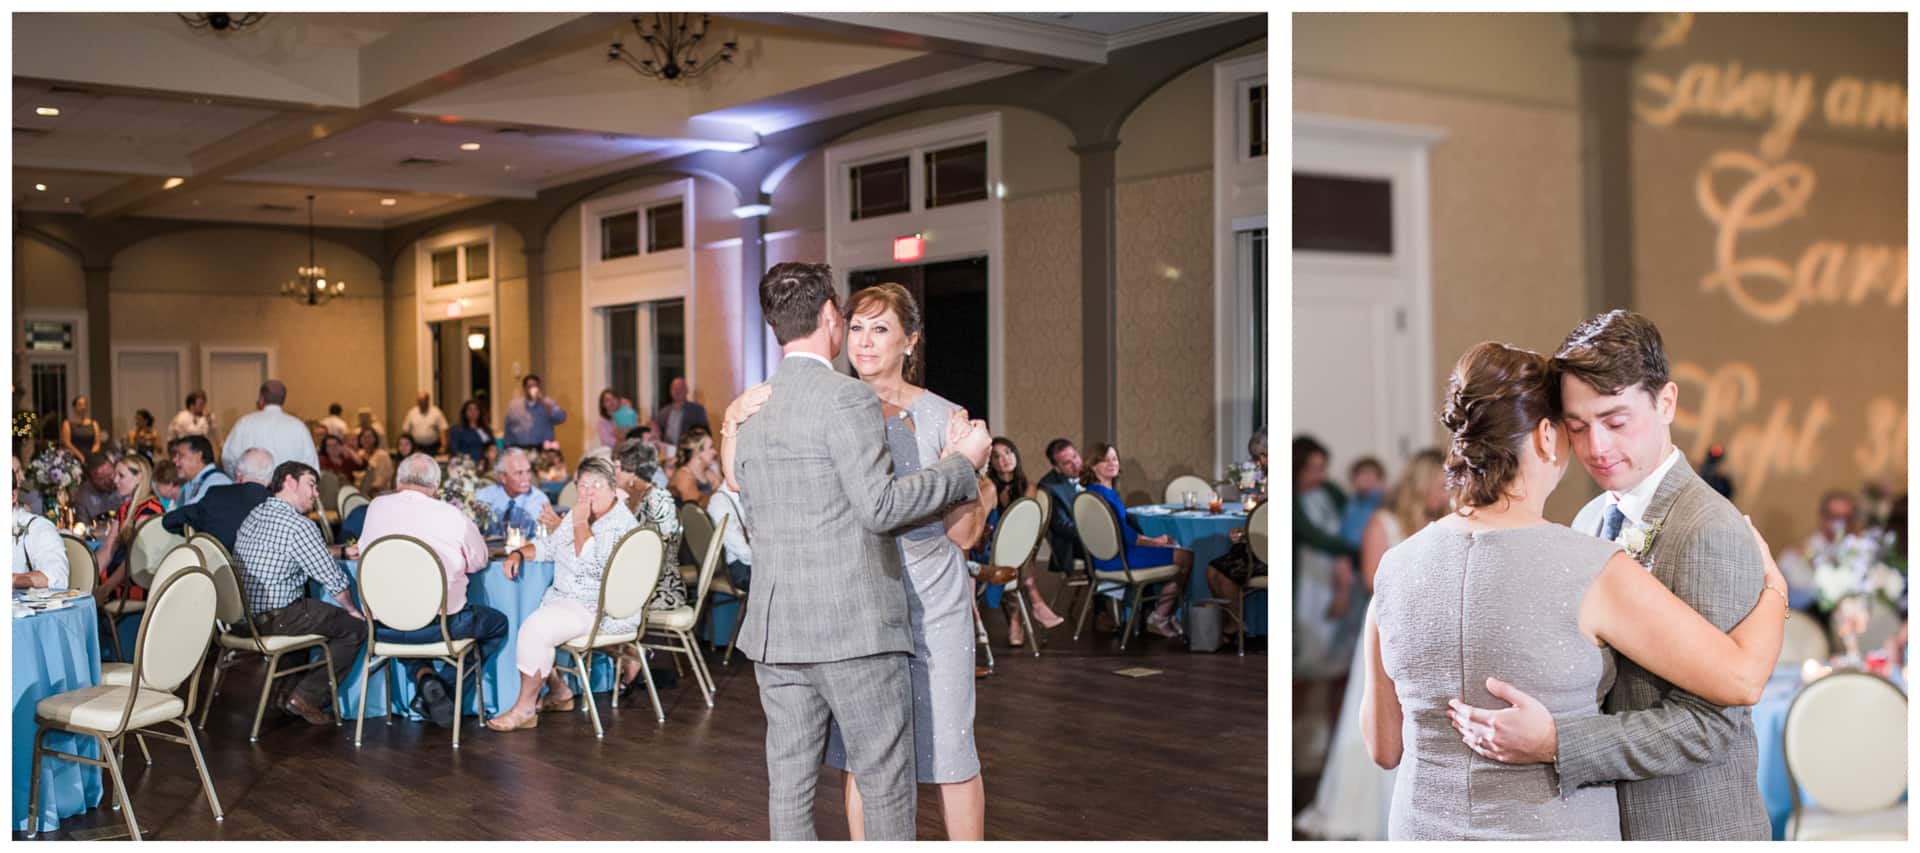 mother son first dance in gray suit and gray dress indoor wedding reception